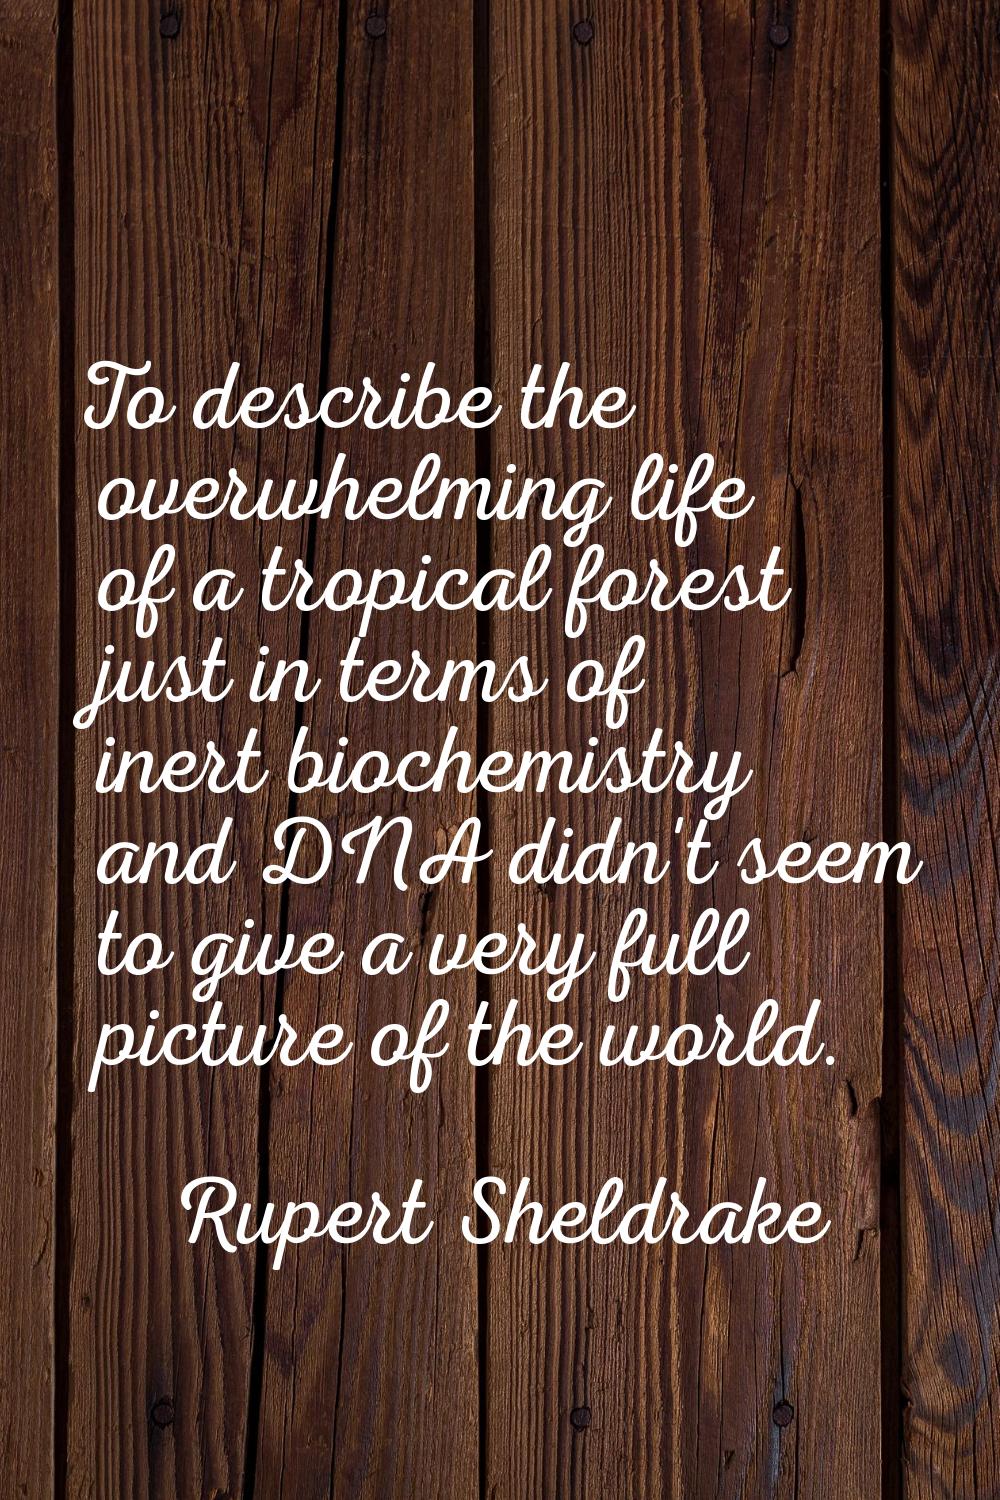 To describe the overwhelming life of a tropical forest just in terms of inert biochemistry and DNA 